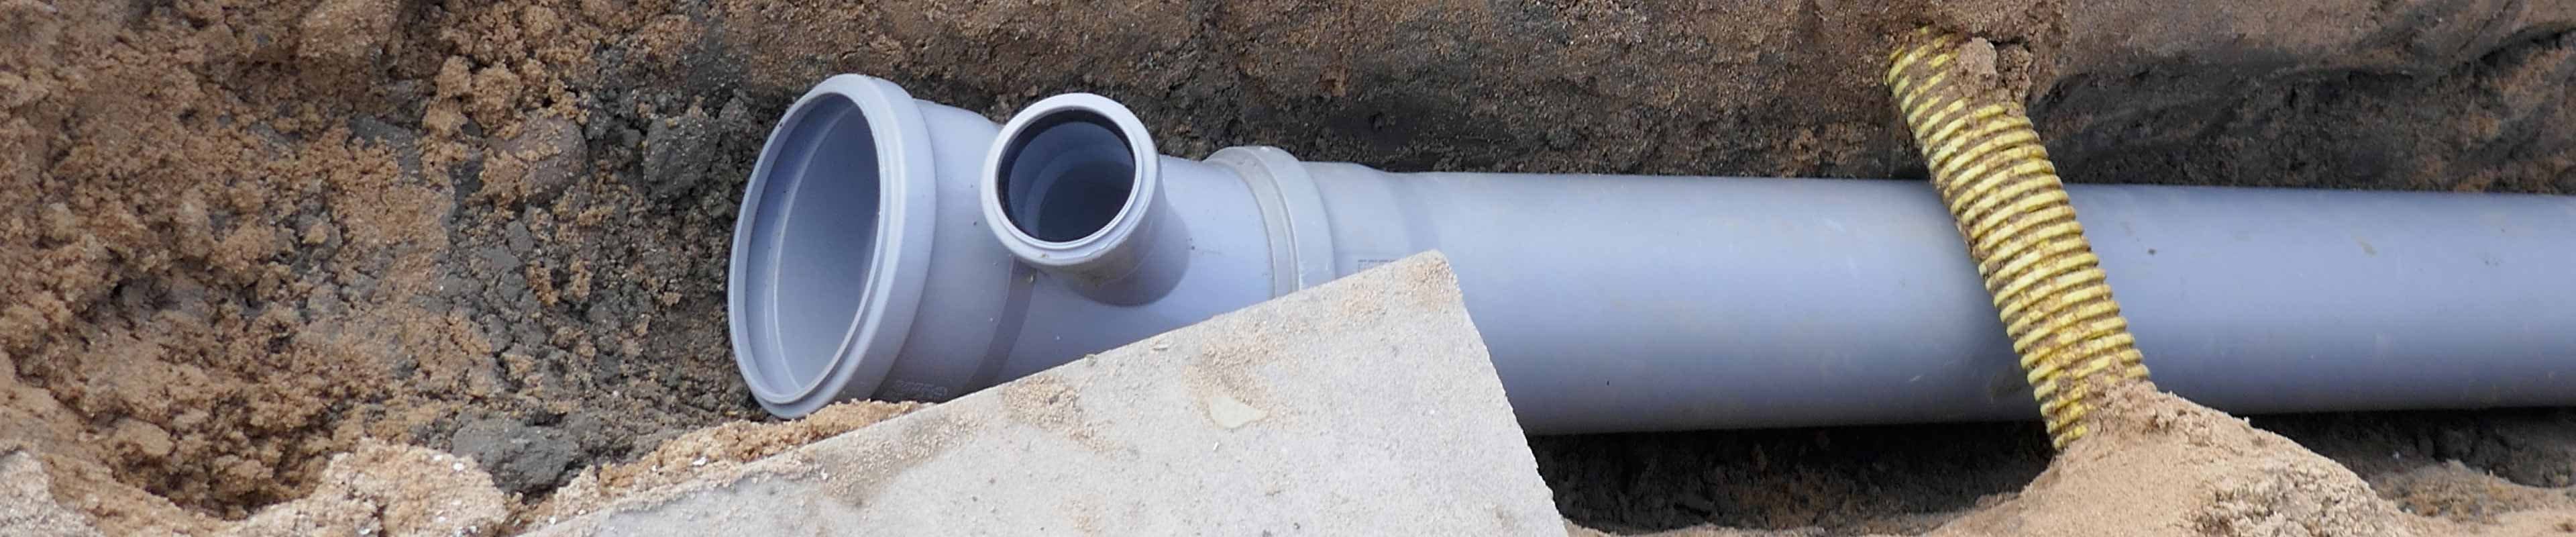 Image of a sewer pipe being installed in a homeowner's front yard.